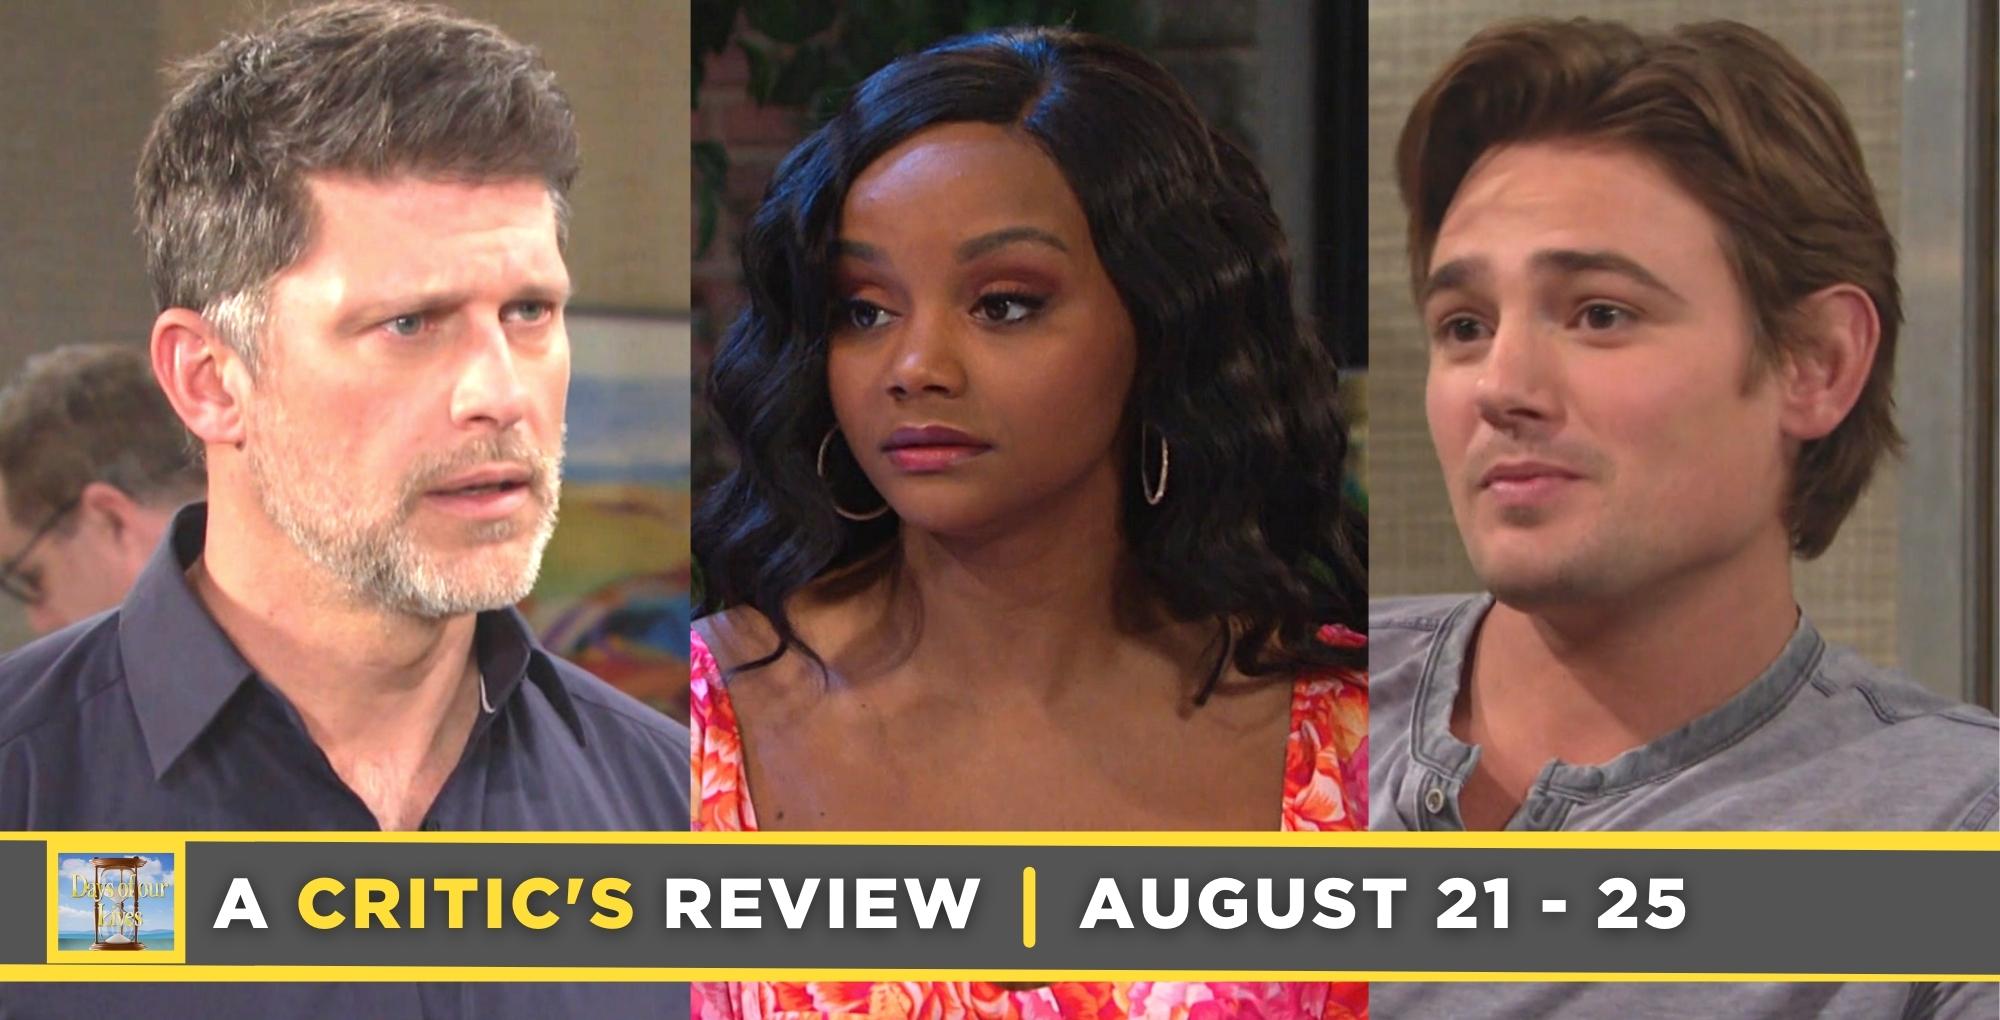 days of our lives critic's review for august 21 – august 25, 2023, three images, eric, chanel, and johnny.